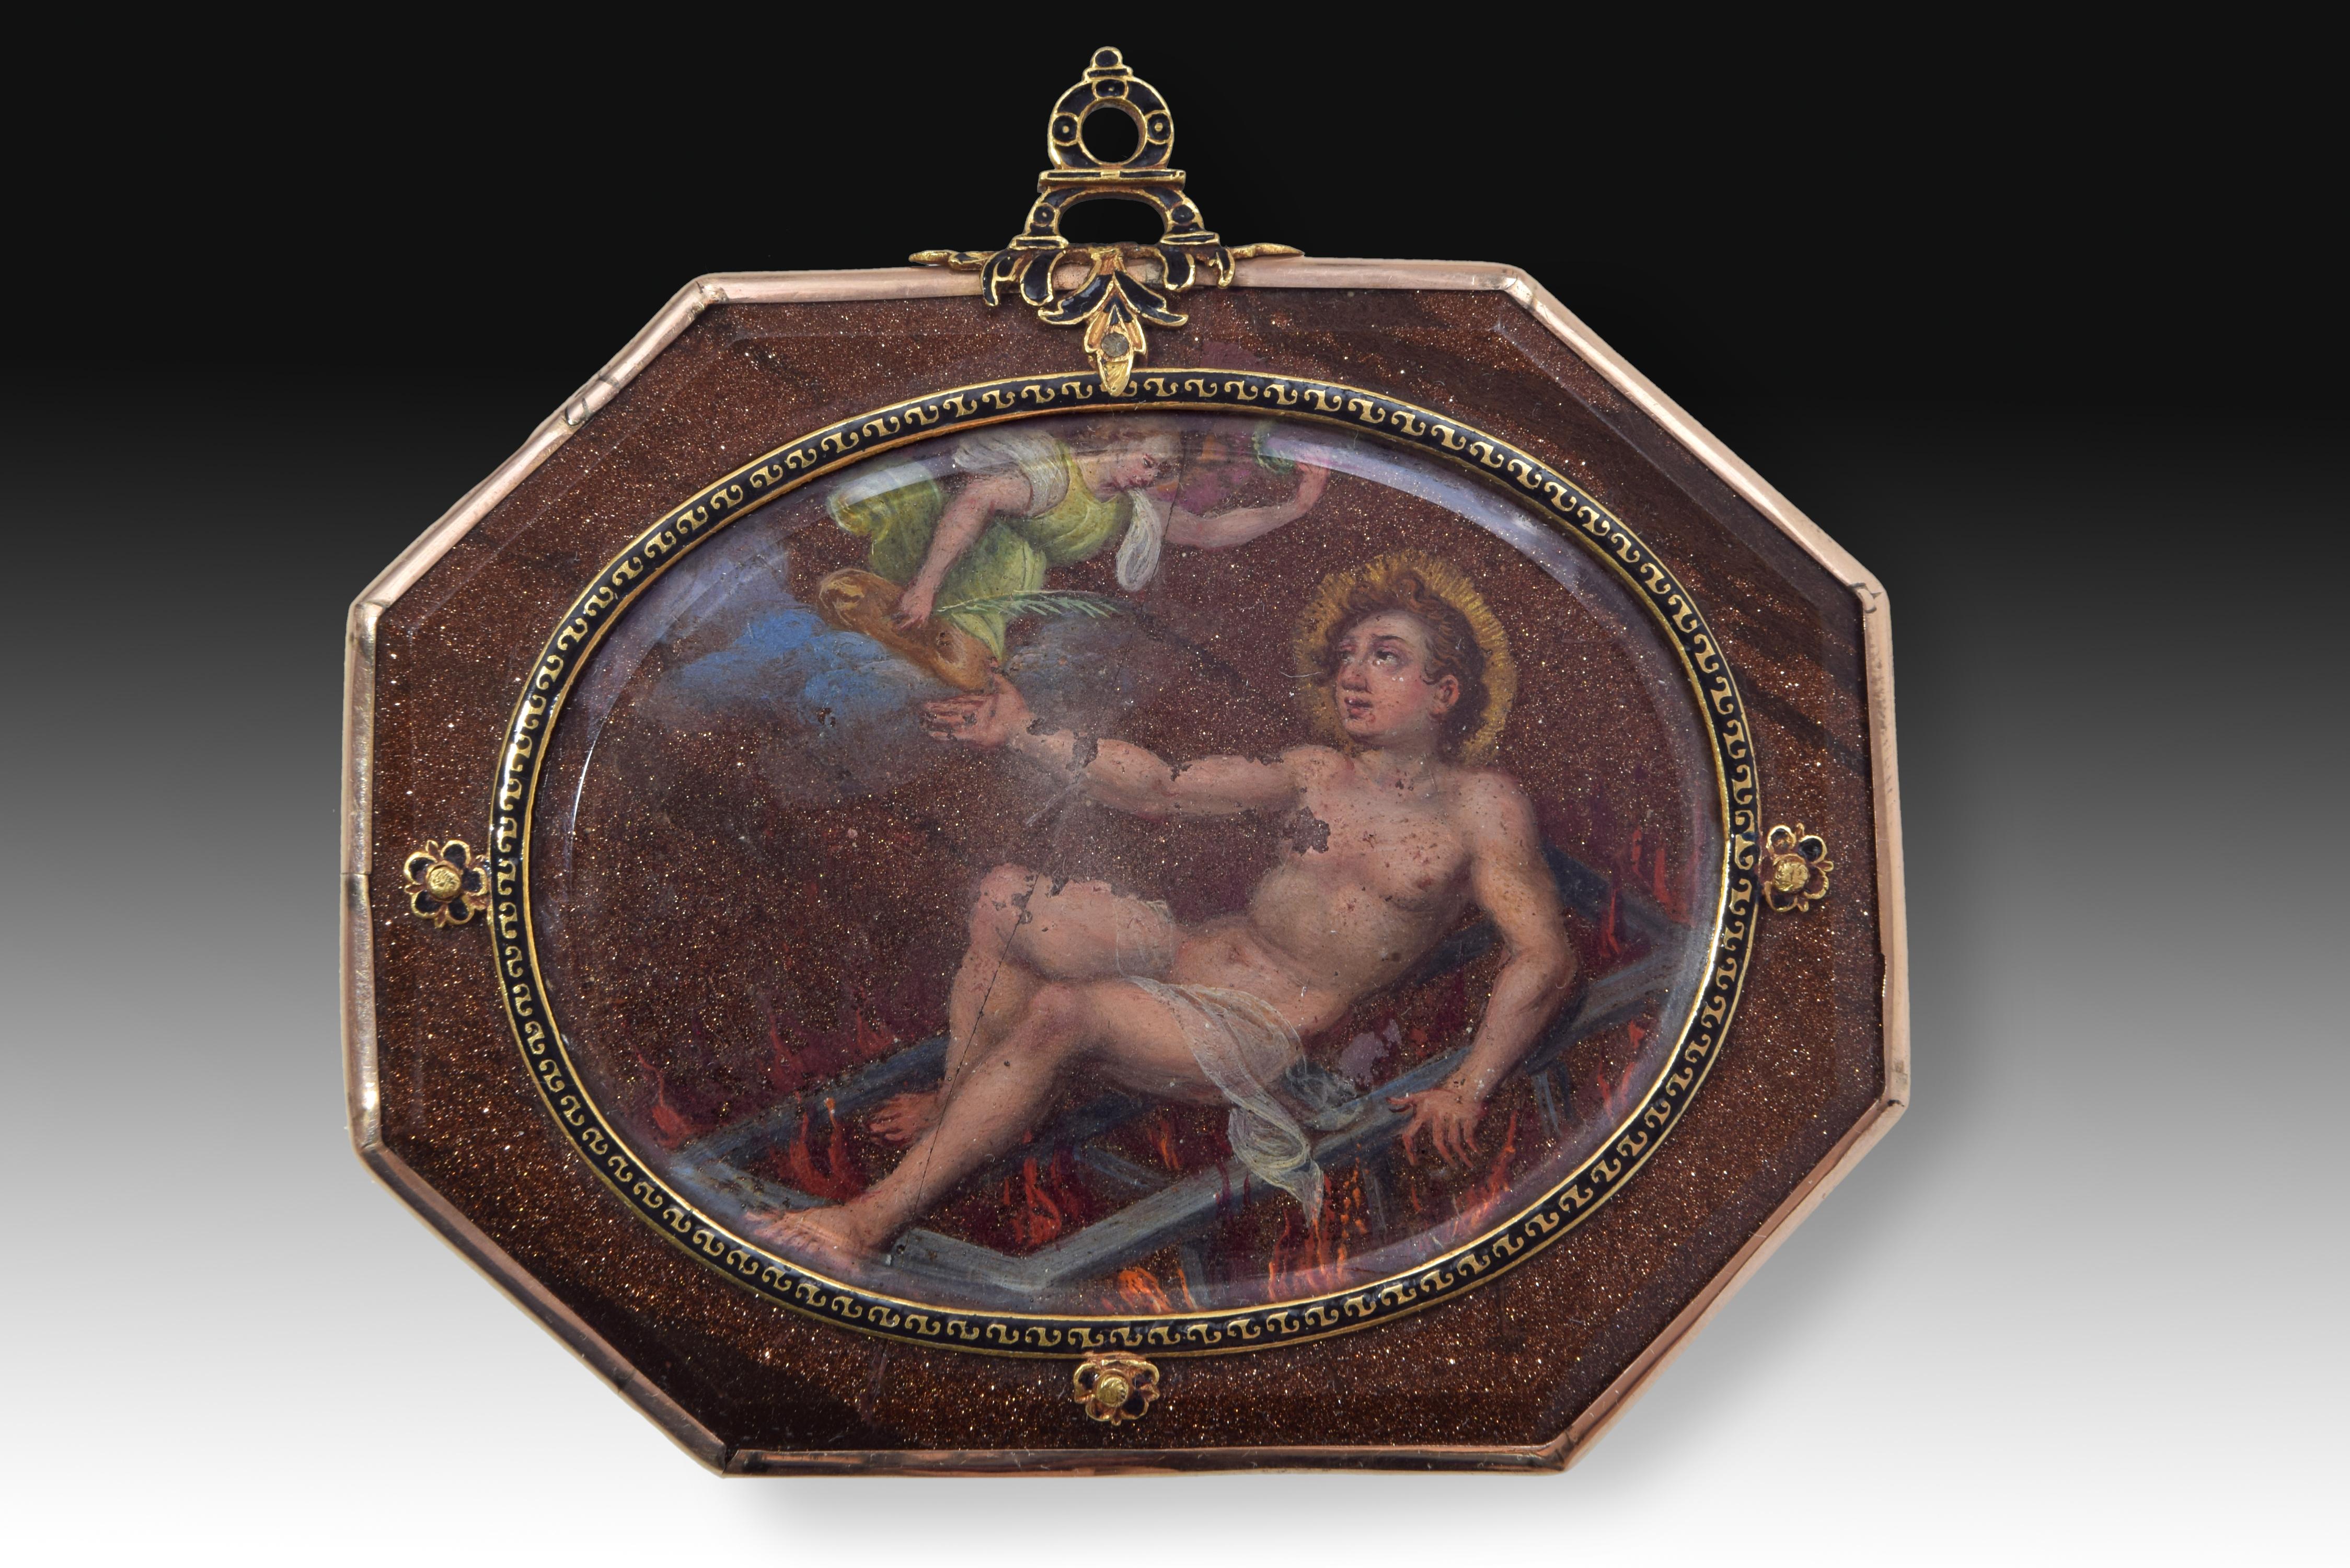 Devotional pendant or reliquary. Oil painting on aventurine, enamel, gold. Spain, 17th century.
Medallion or devotional pendant or reliquary made of aventurine or aventurine with an octagonal shape and faceted fronts, enhanced with a series of